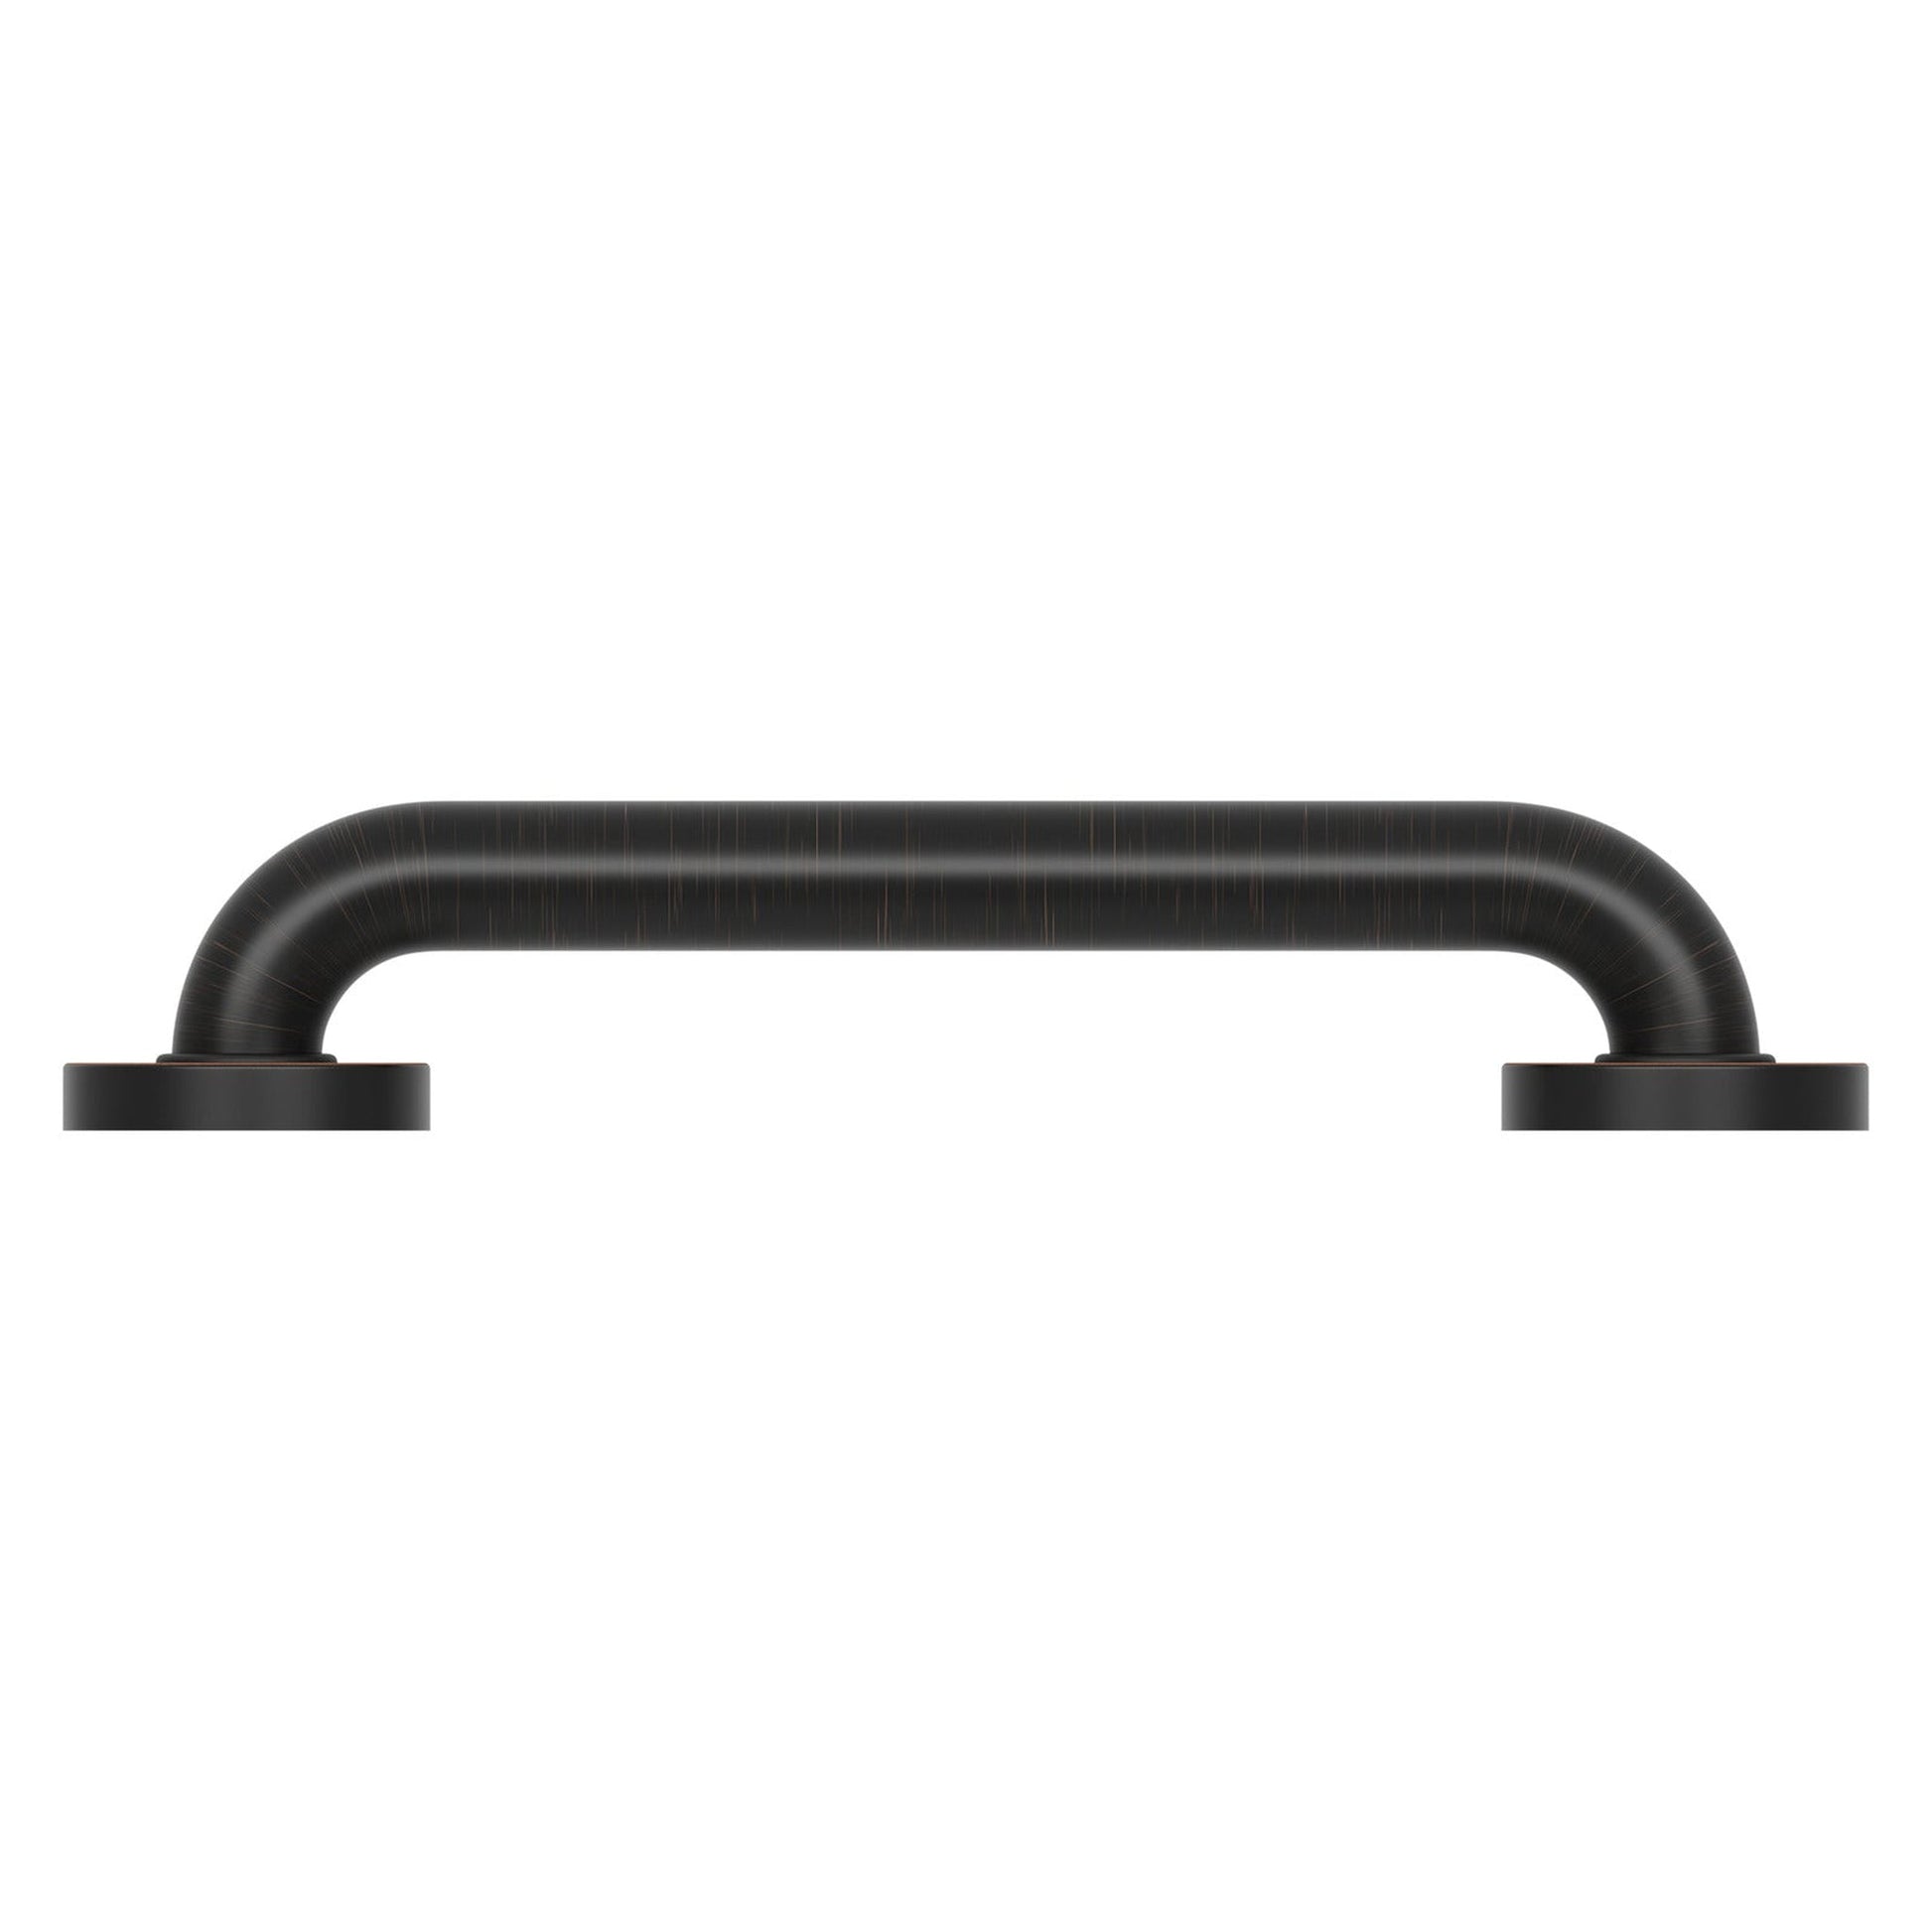 Evekare 12" x 1.25" Stainless Steel Concealed Mount Grab Bar in Oil Rubbed Bronze